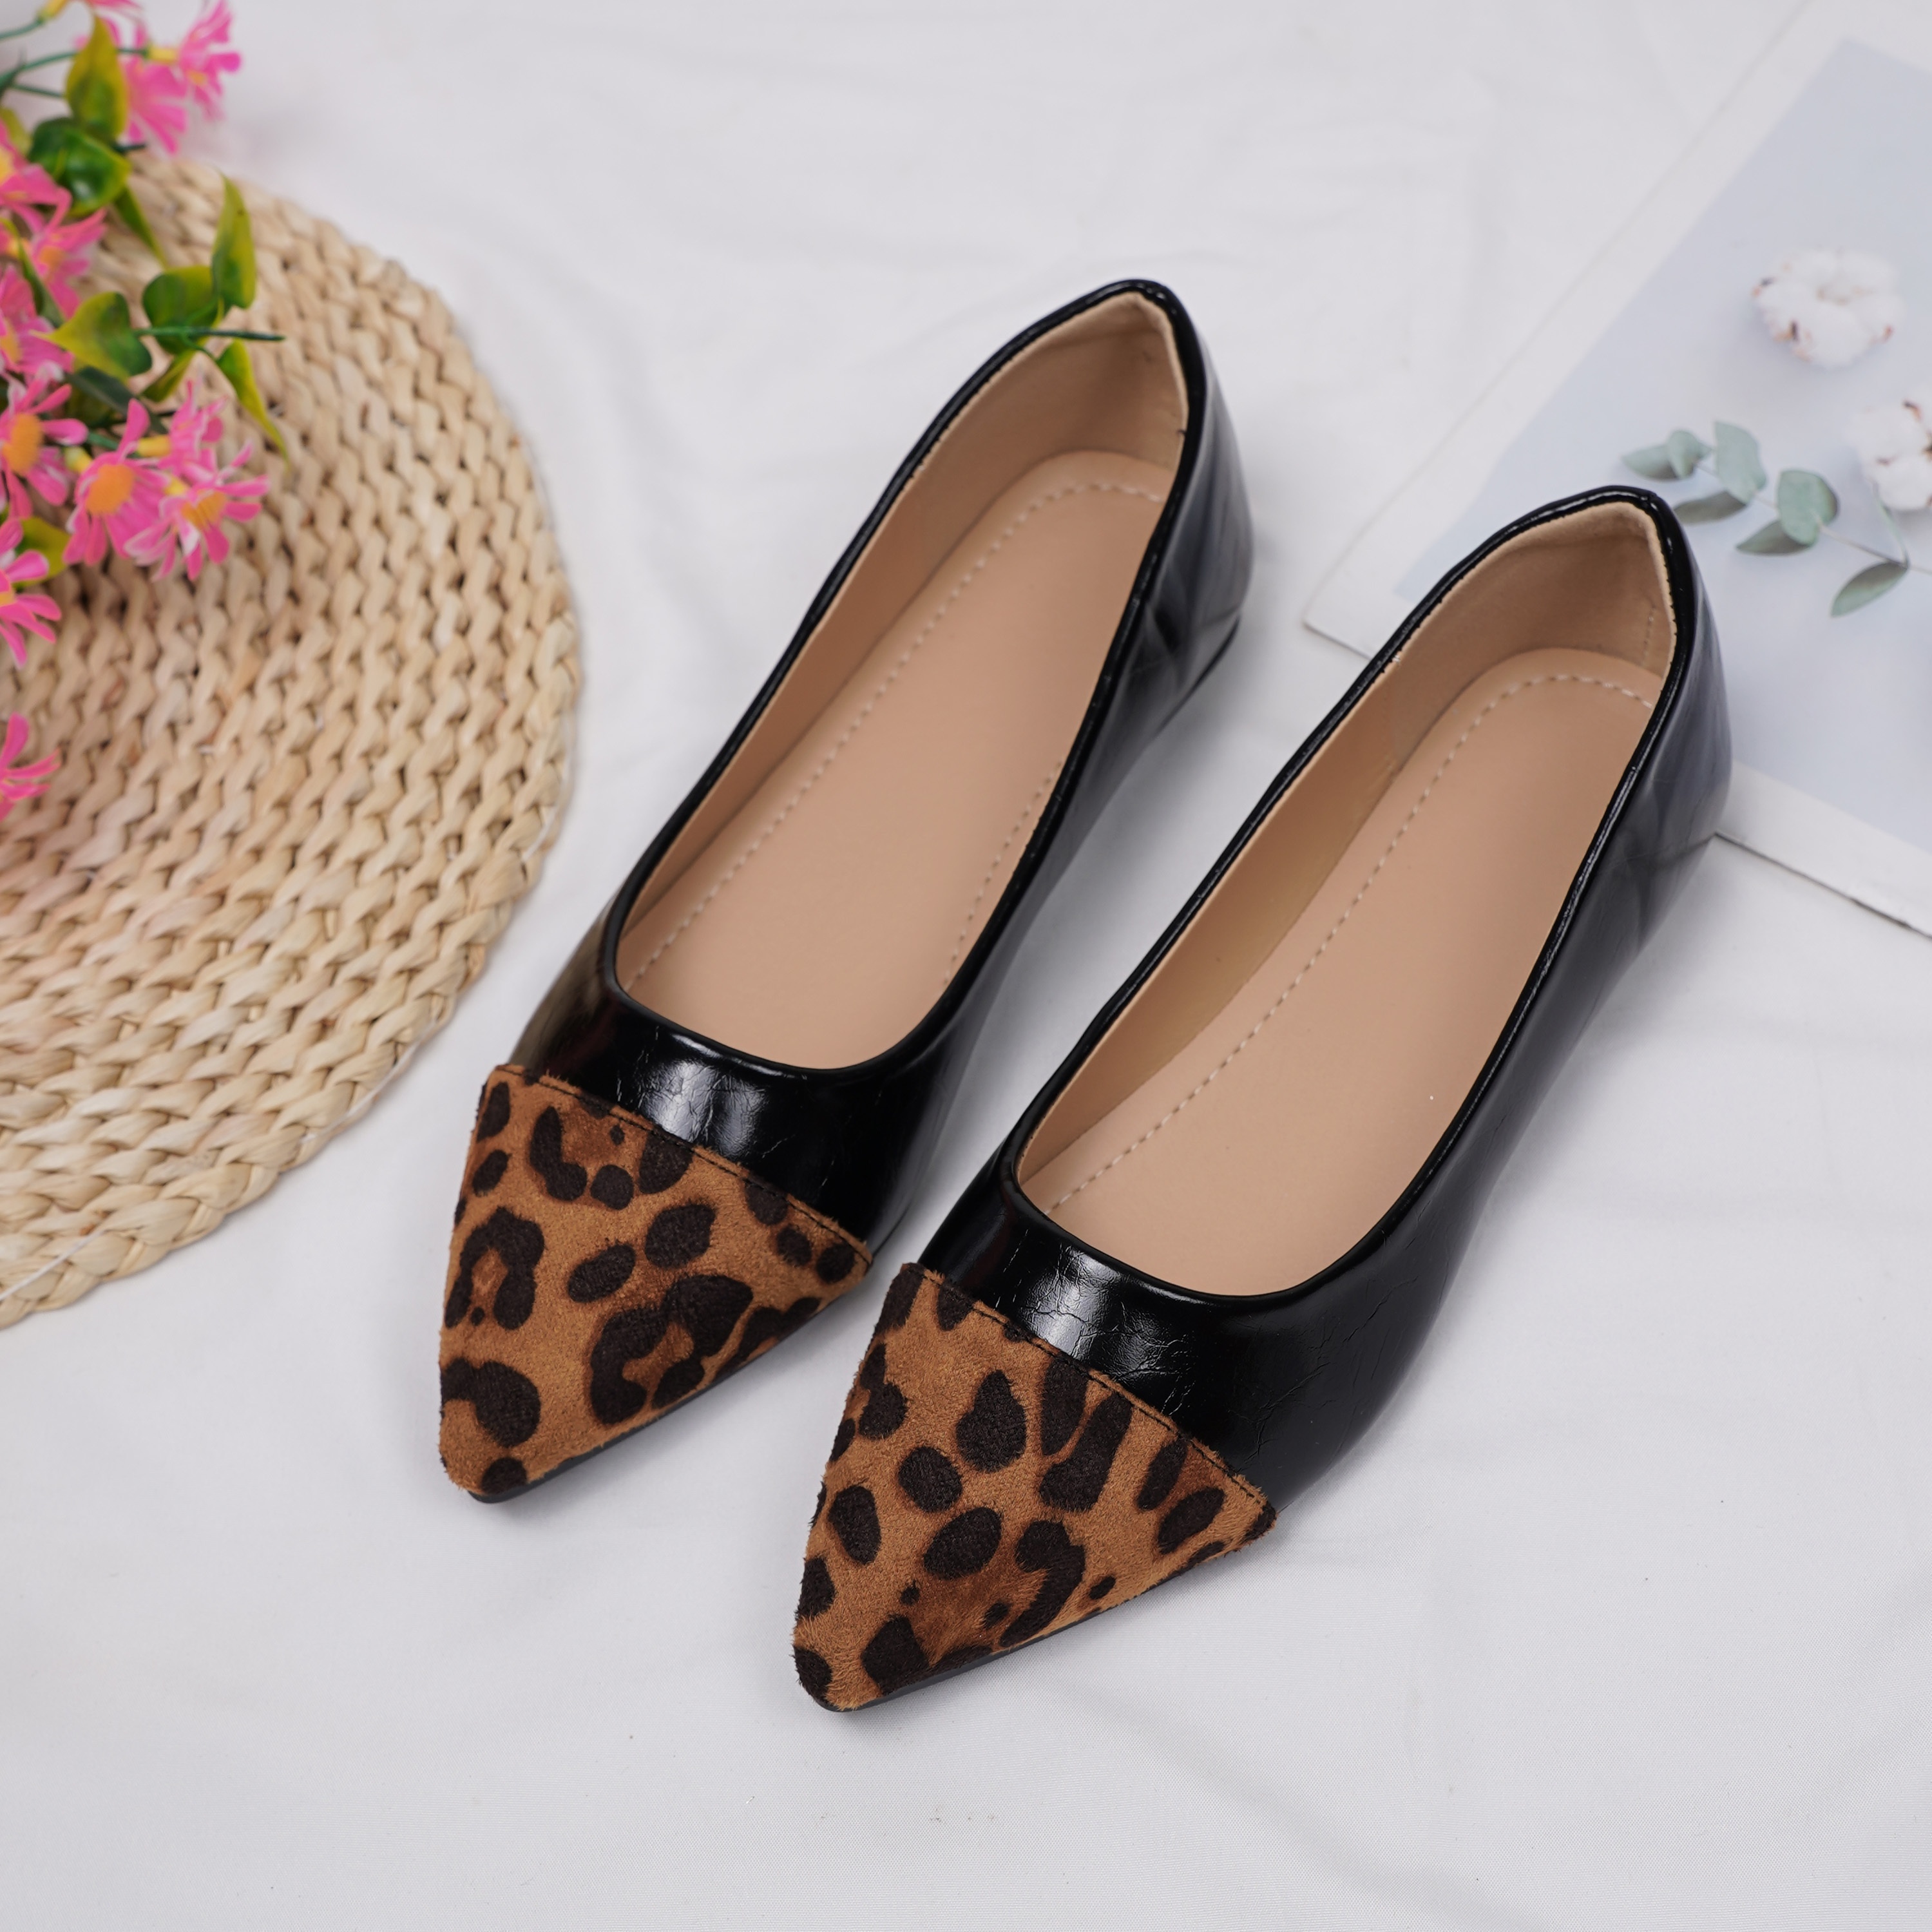 Get Spotted: The 6 Best Leopard Flats for Women (2021)  Animal print shoes  outfit, Leopard shoes flats, Leopard flats